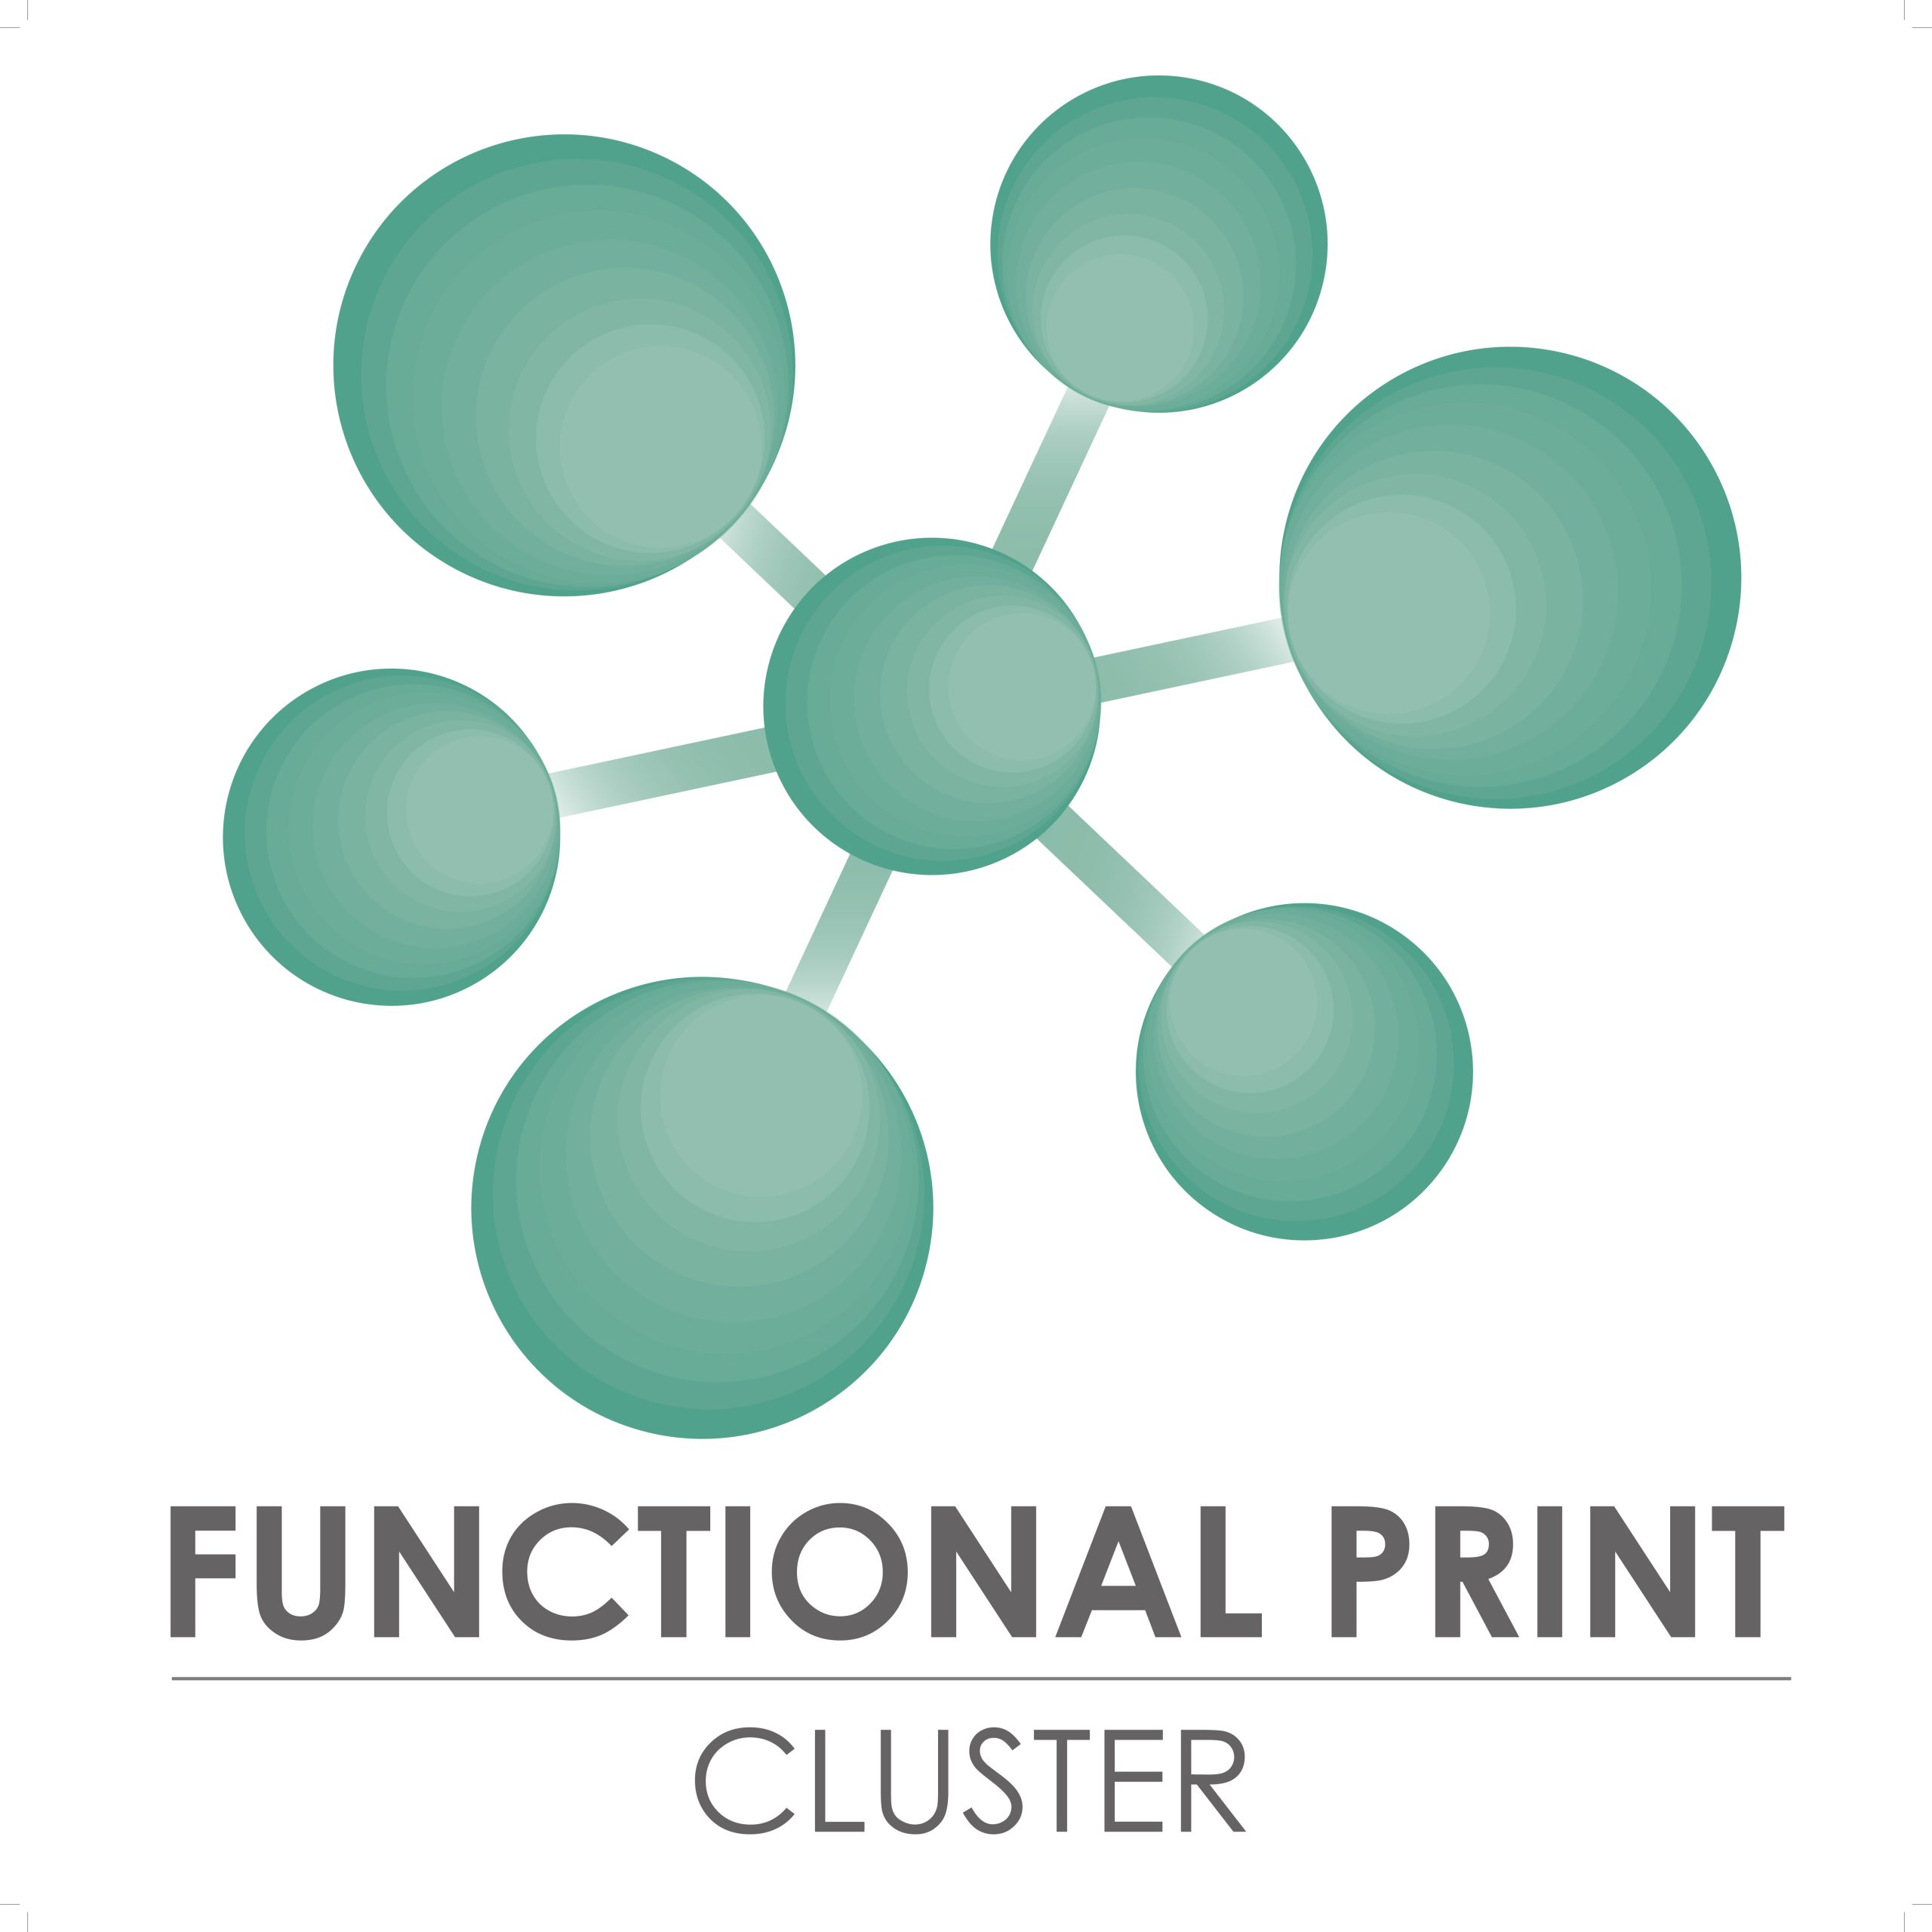 Functional Print Cluster